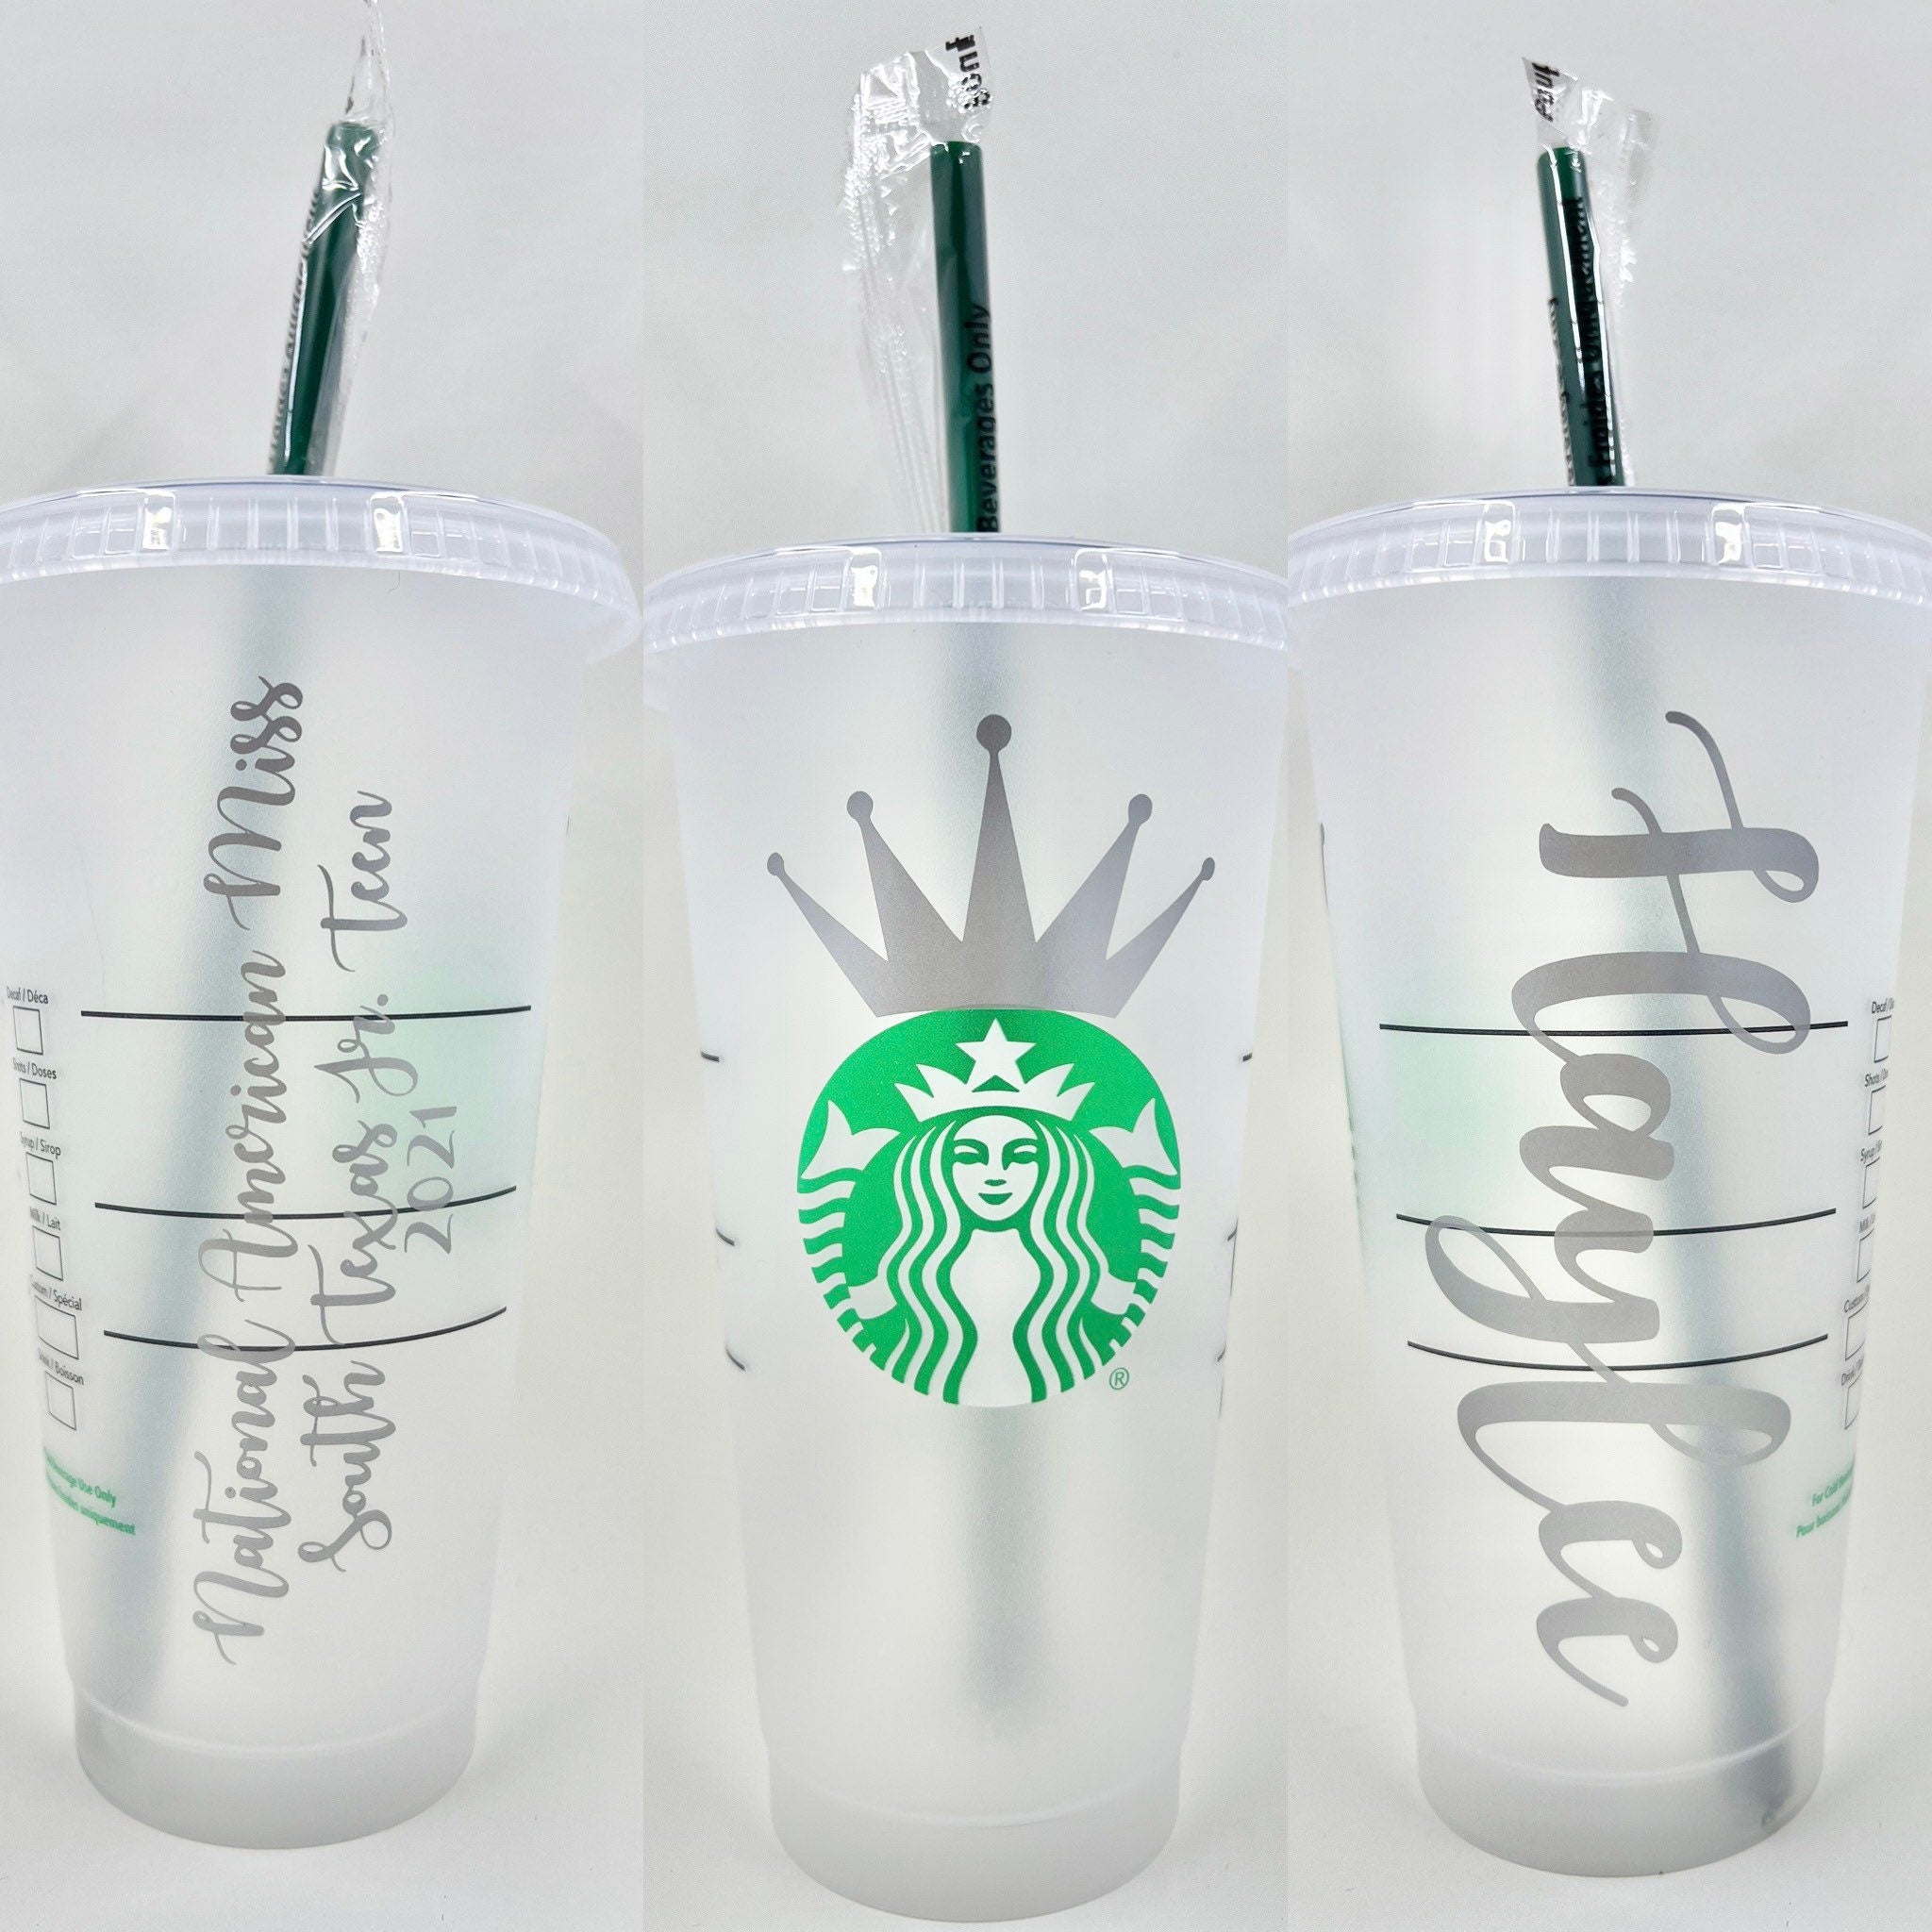 National American Miss Starbucks Cup